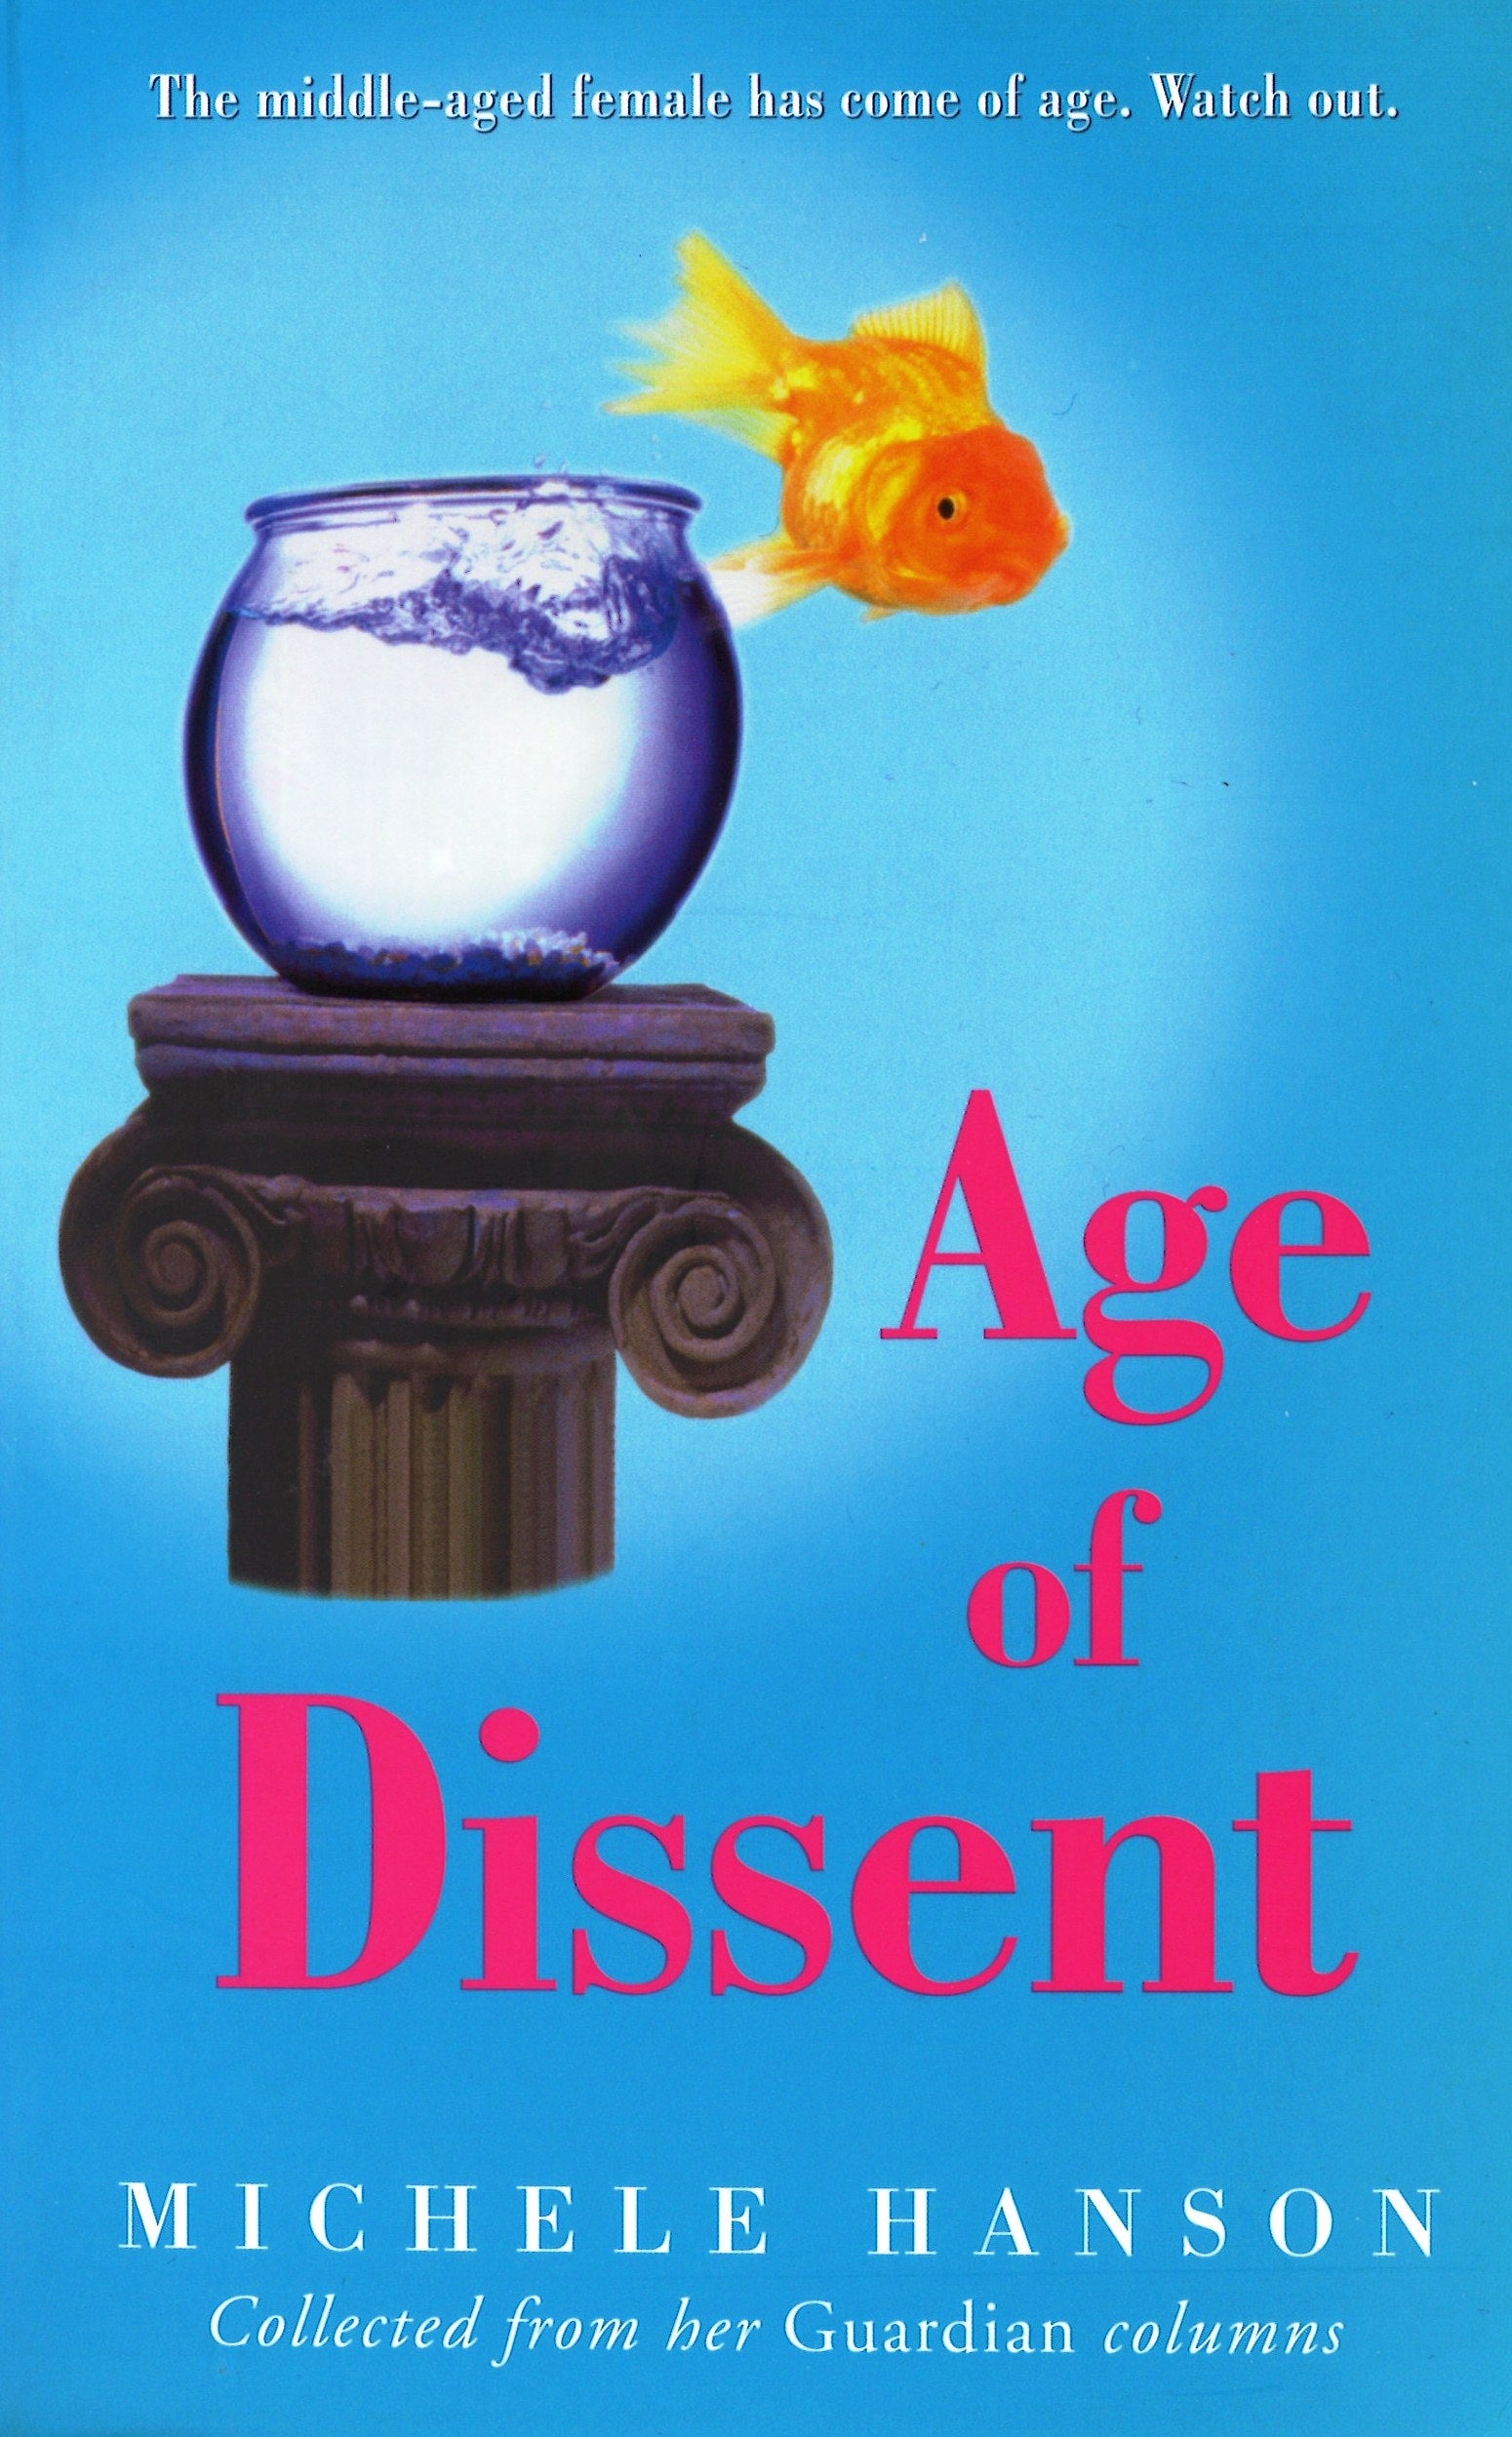 Age Of Dissent by Michele Hanson